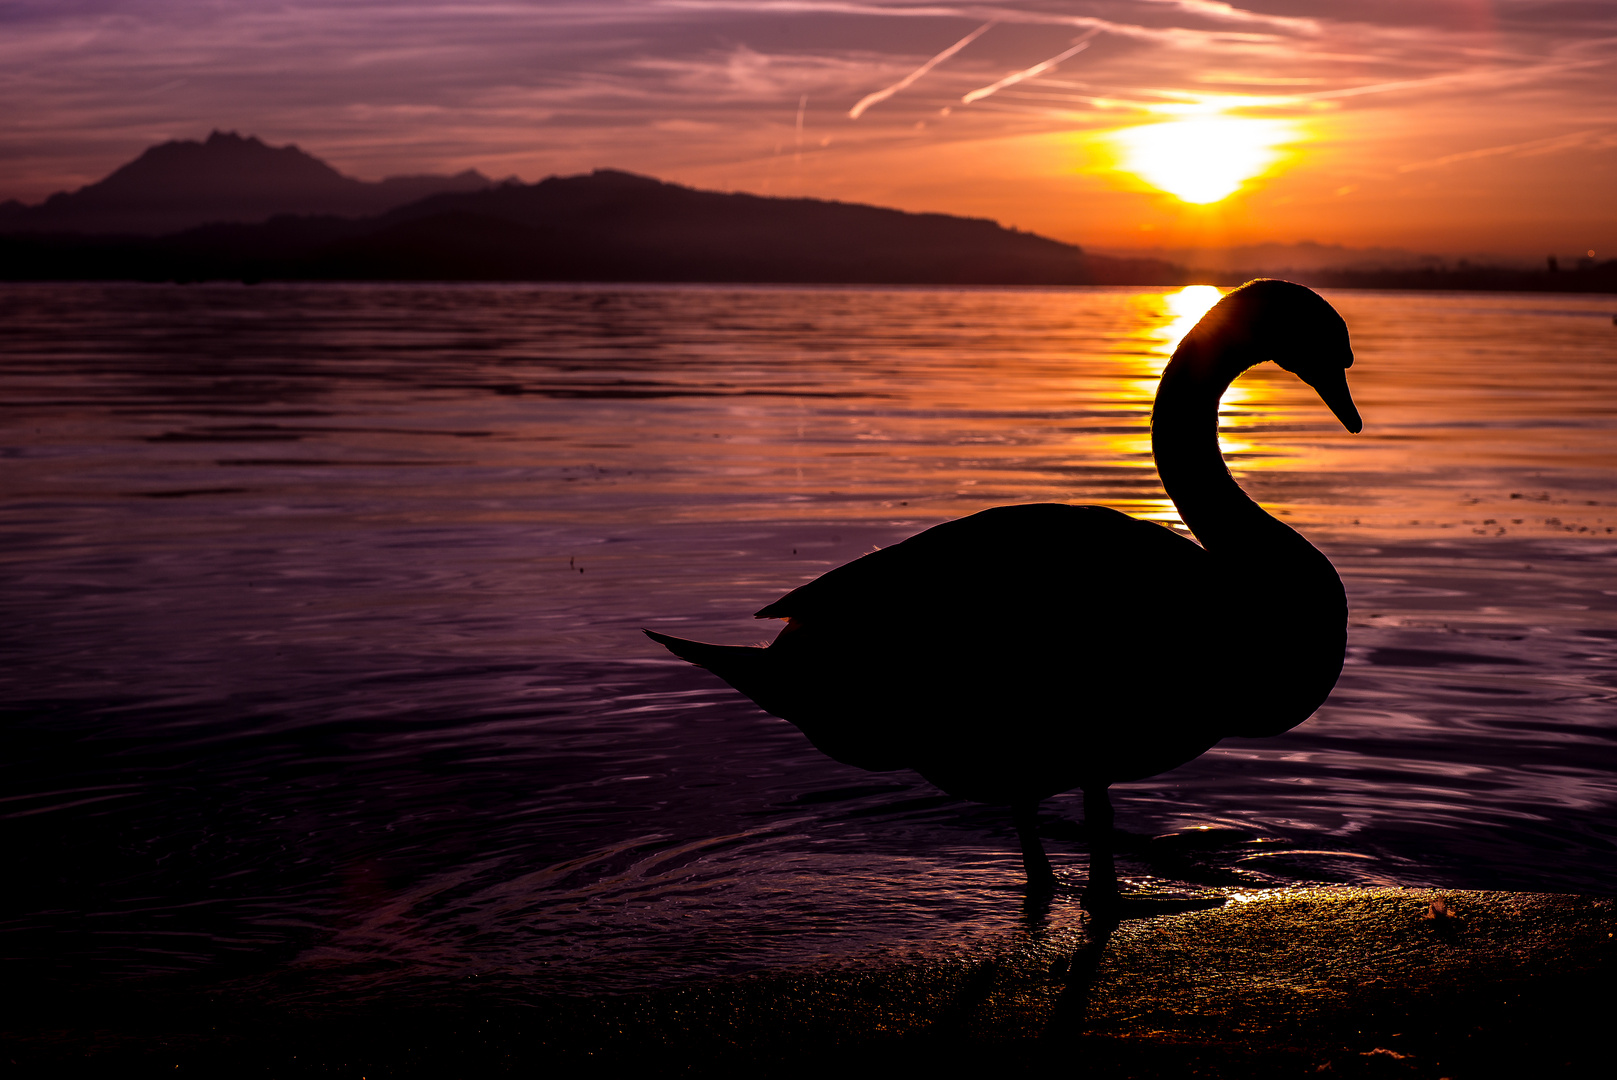 Sunset and swan in Zug